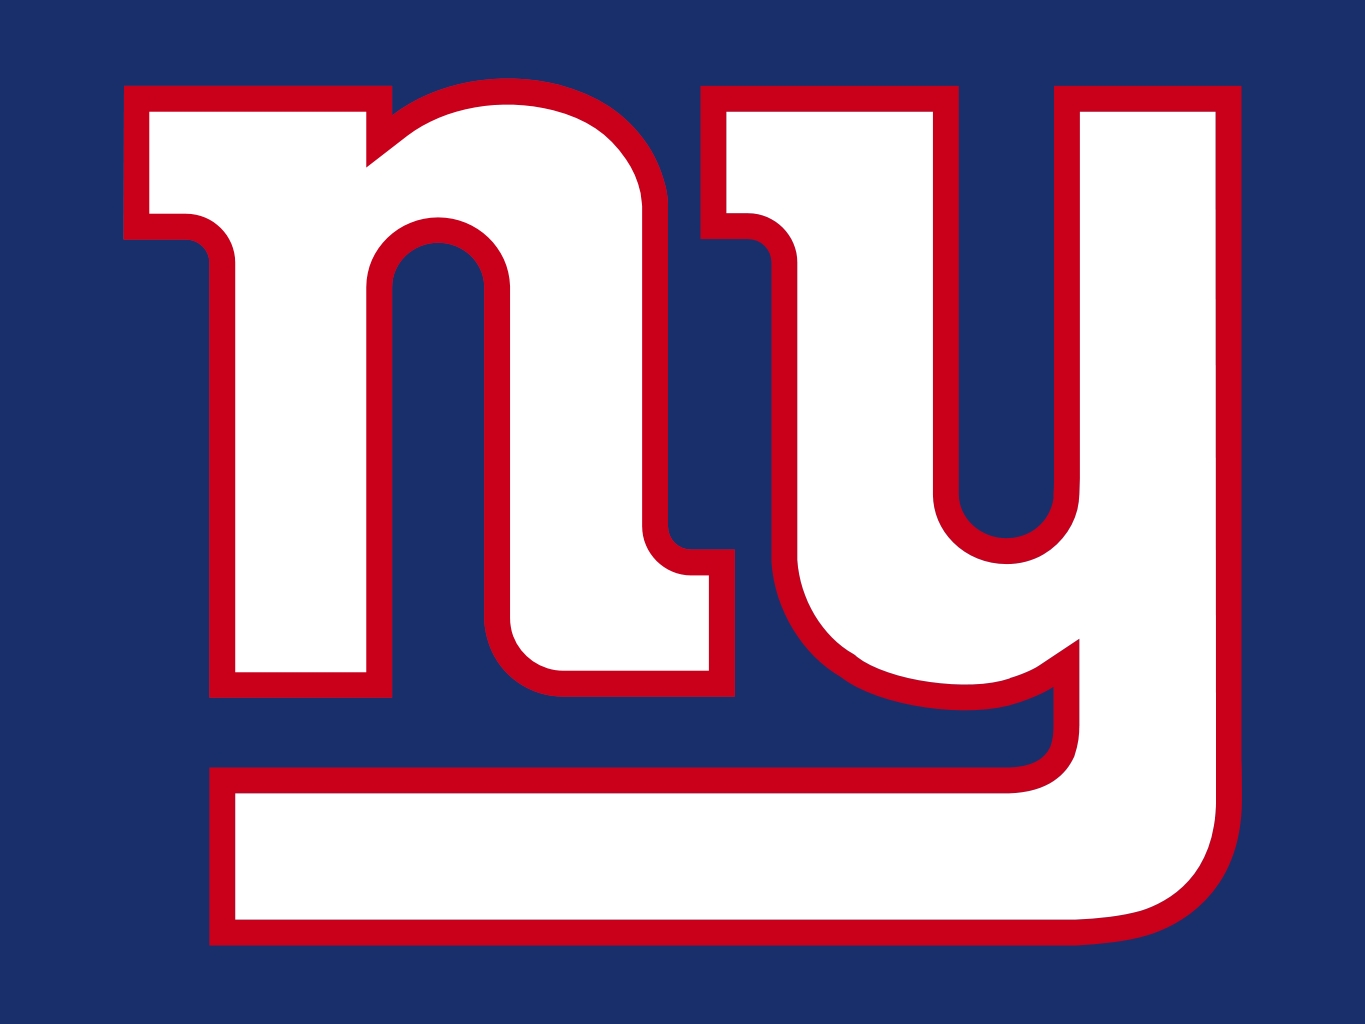 New York Giants Hd Wallpapers 25762 Images | largepict.